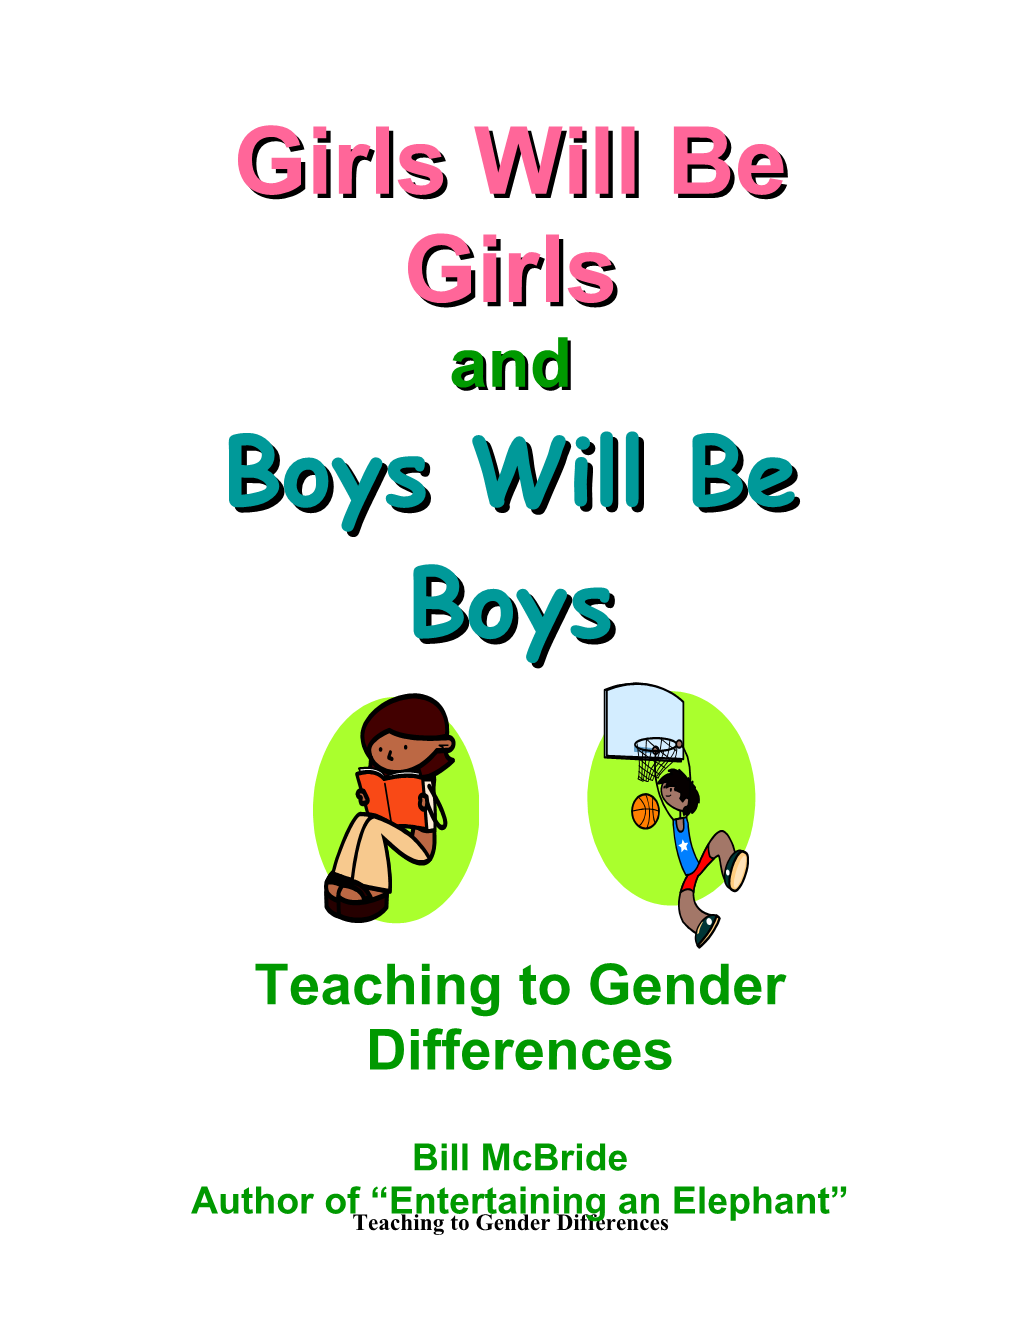 Brain-Based Differences in Girls and Boys